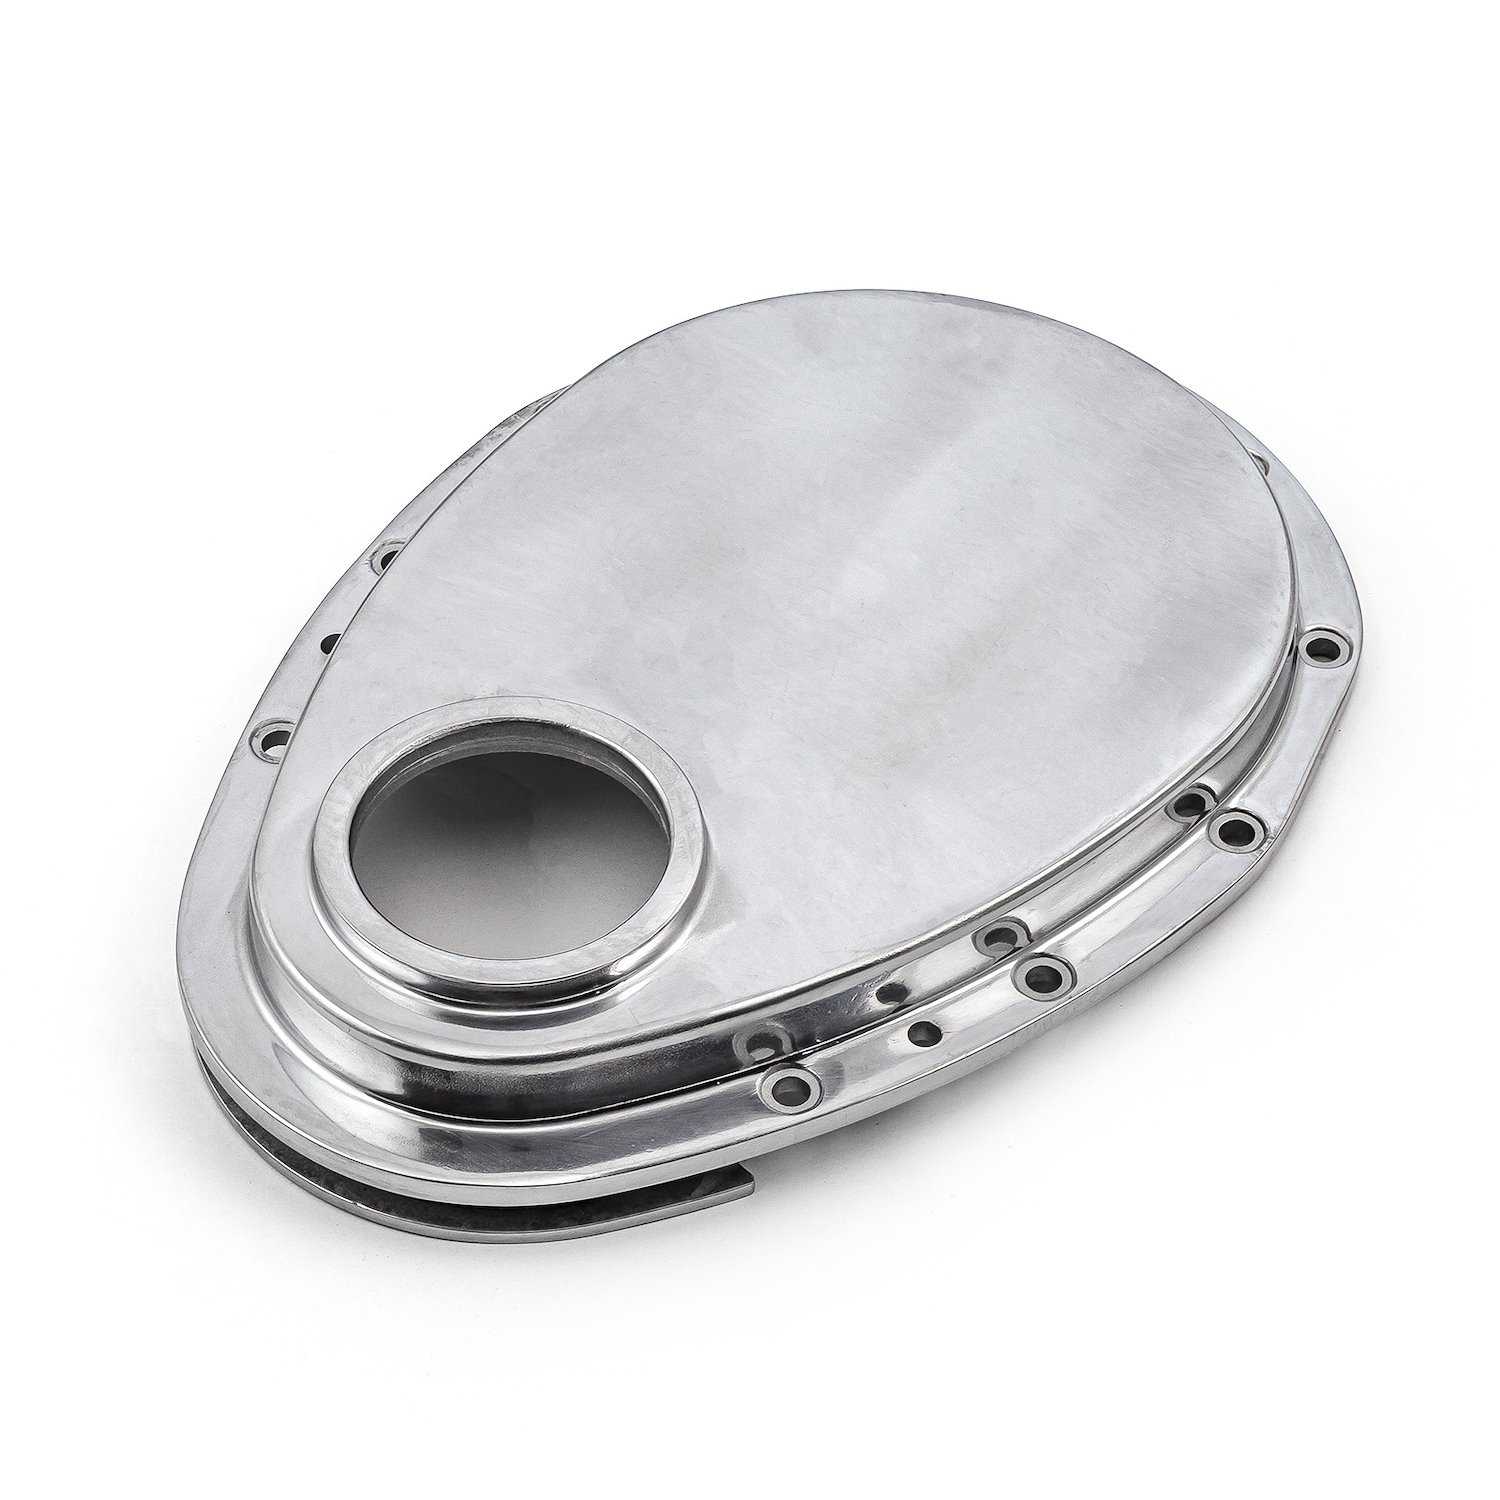 Polished Aluminum Timing Chain Cover Small Block Chevy 350